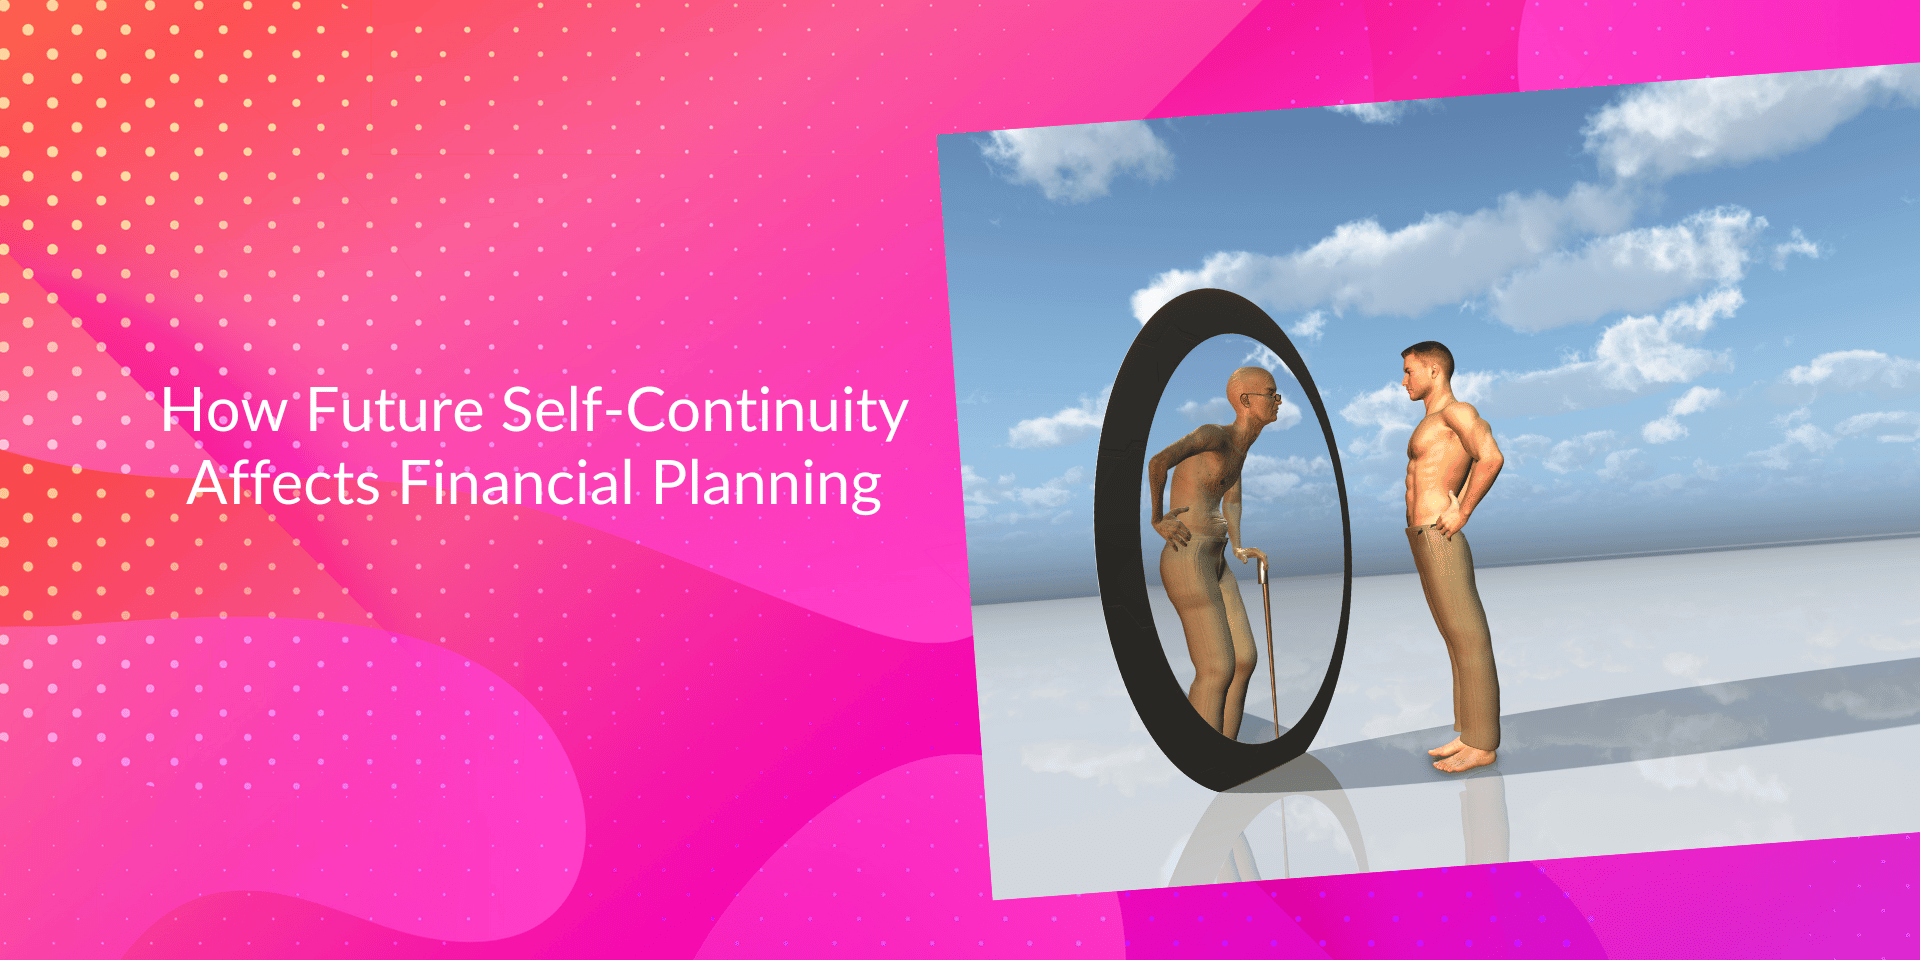 How Future Self-Continuity Affects Financial Planning